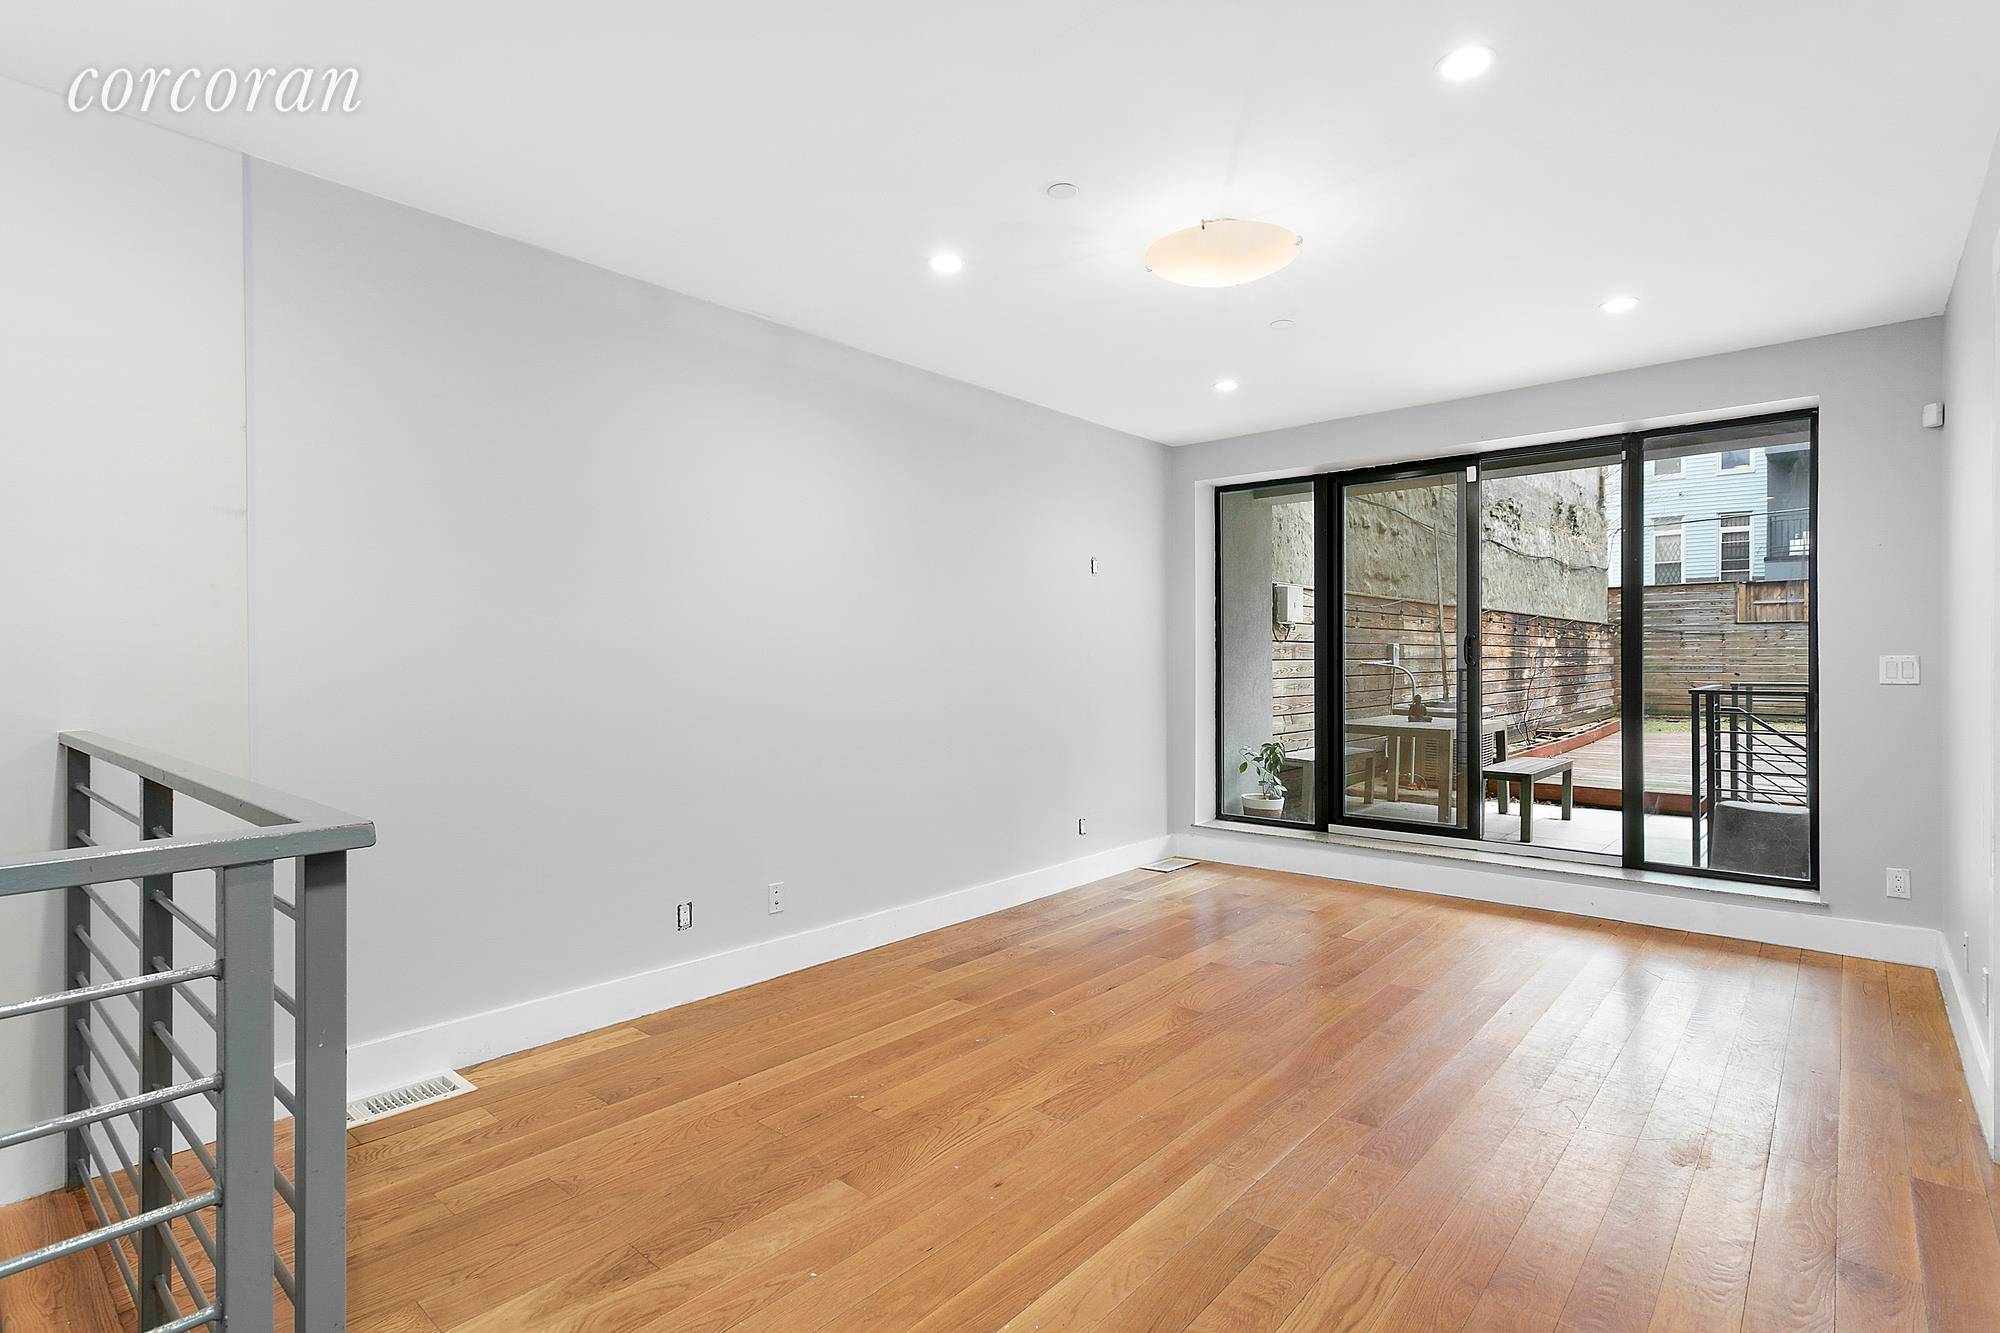 NEW TO THE MARKET ! ! Unit 1A is an amazing duplex apartment in a 8 unit condominium located on the border of Clinton Hill and Bedford Stuyvesant !